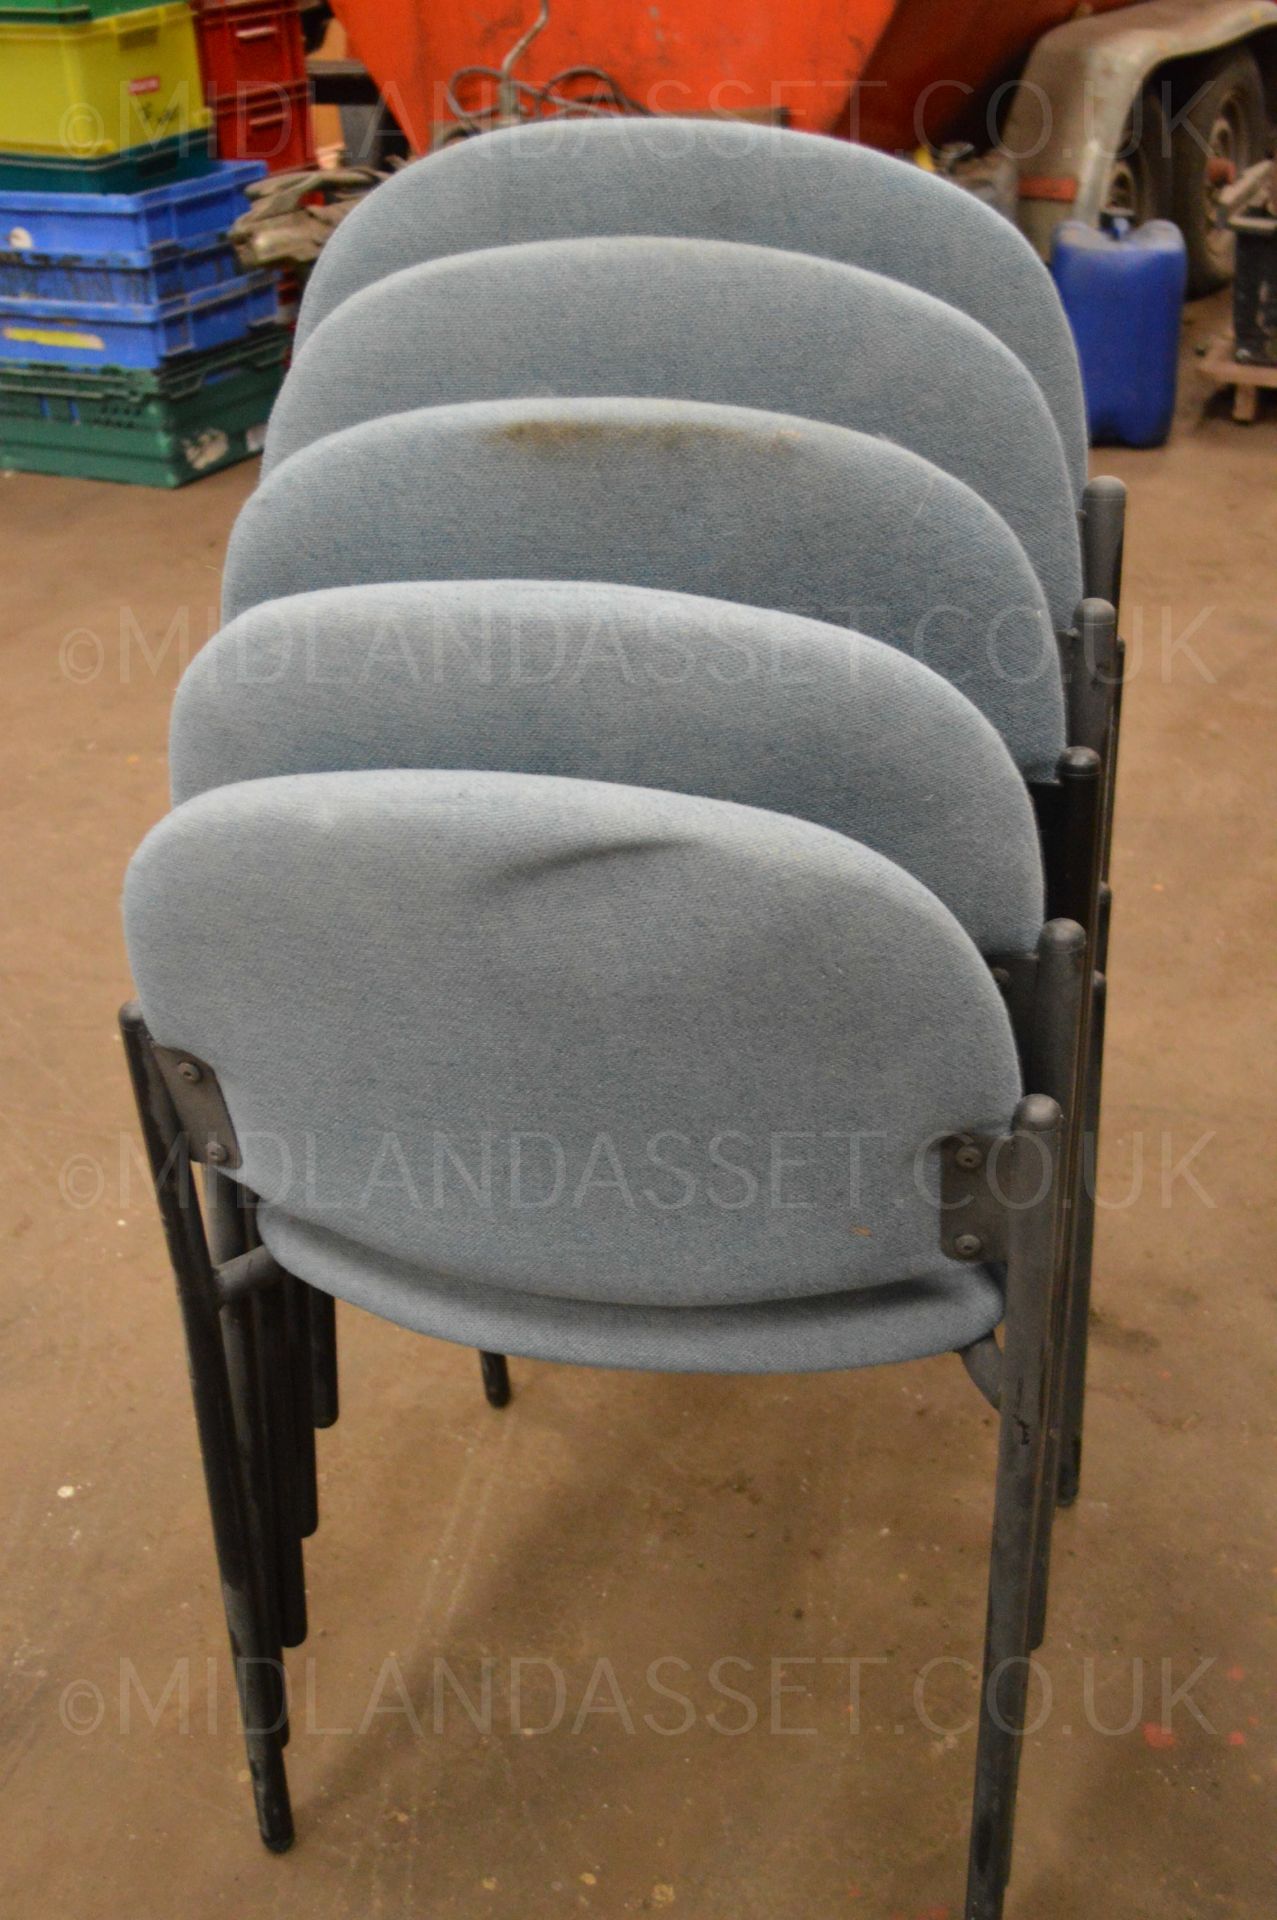 X5 BLUE CLOTH CHAIRS - USED CONDITION - Image 2 of 2